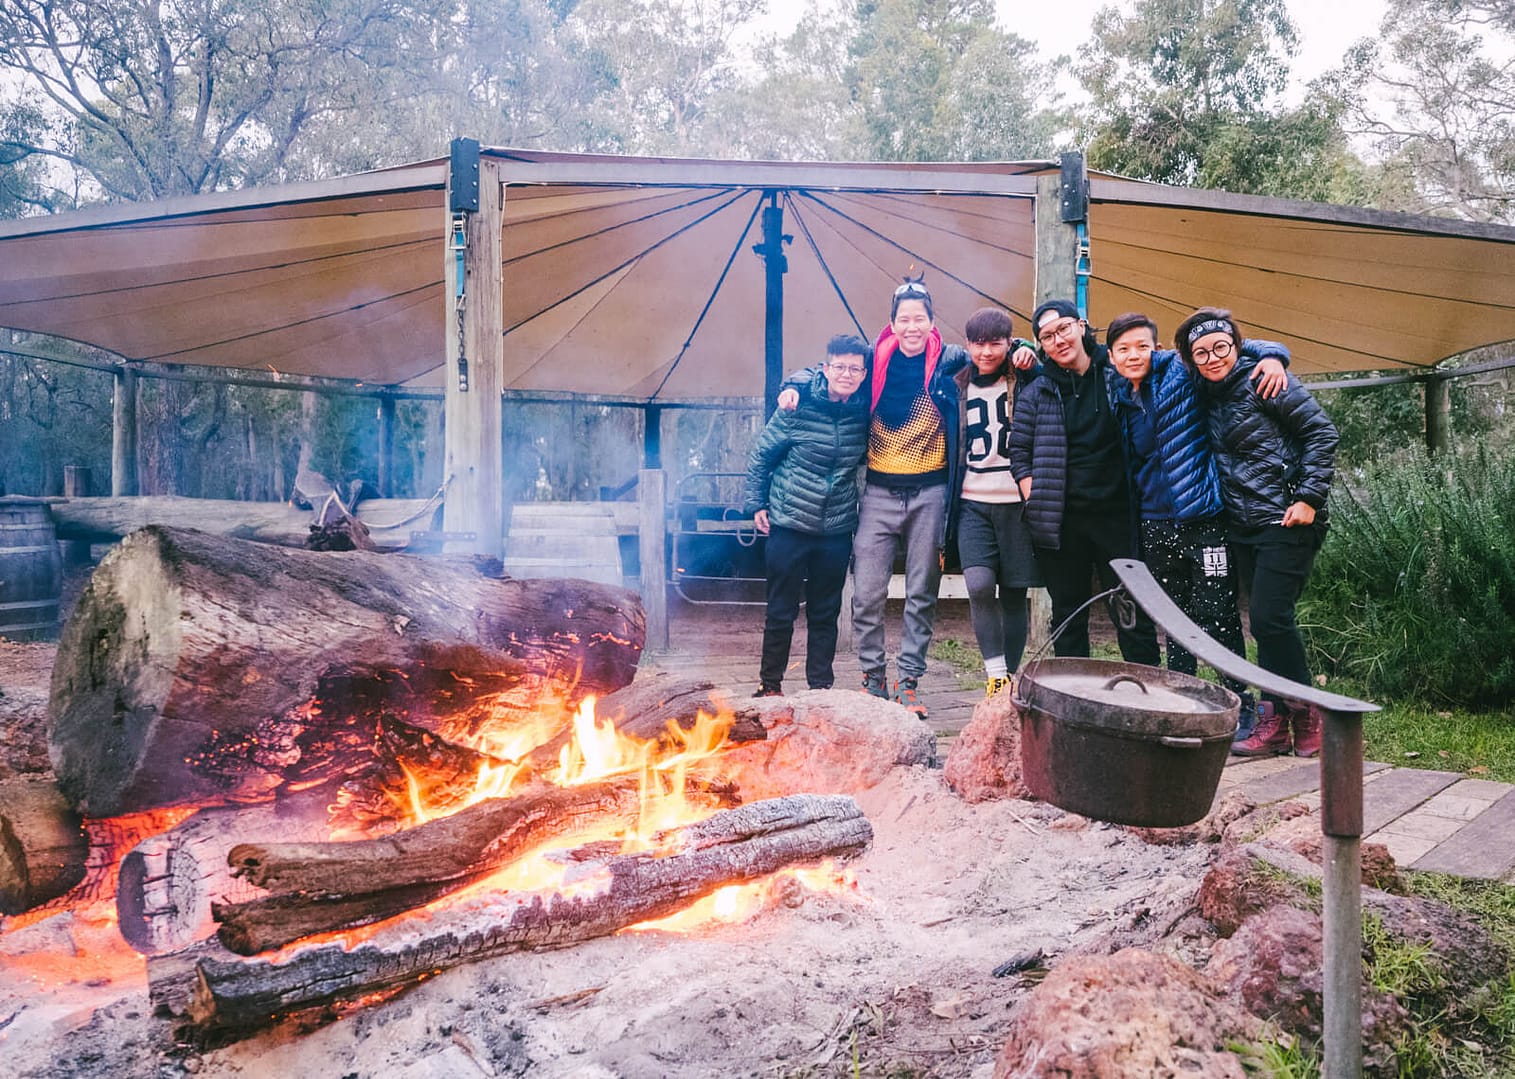 Perth, Australia - Jesters Flat - Warming ourselves at the campfire